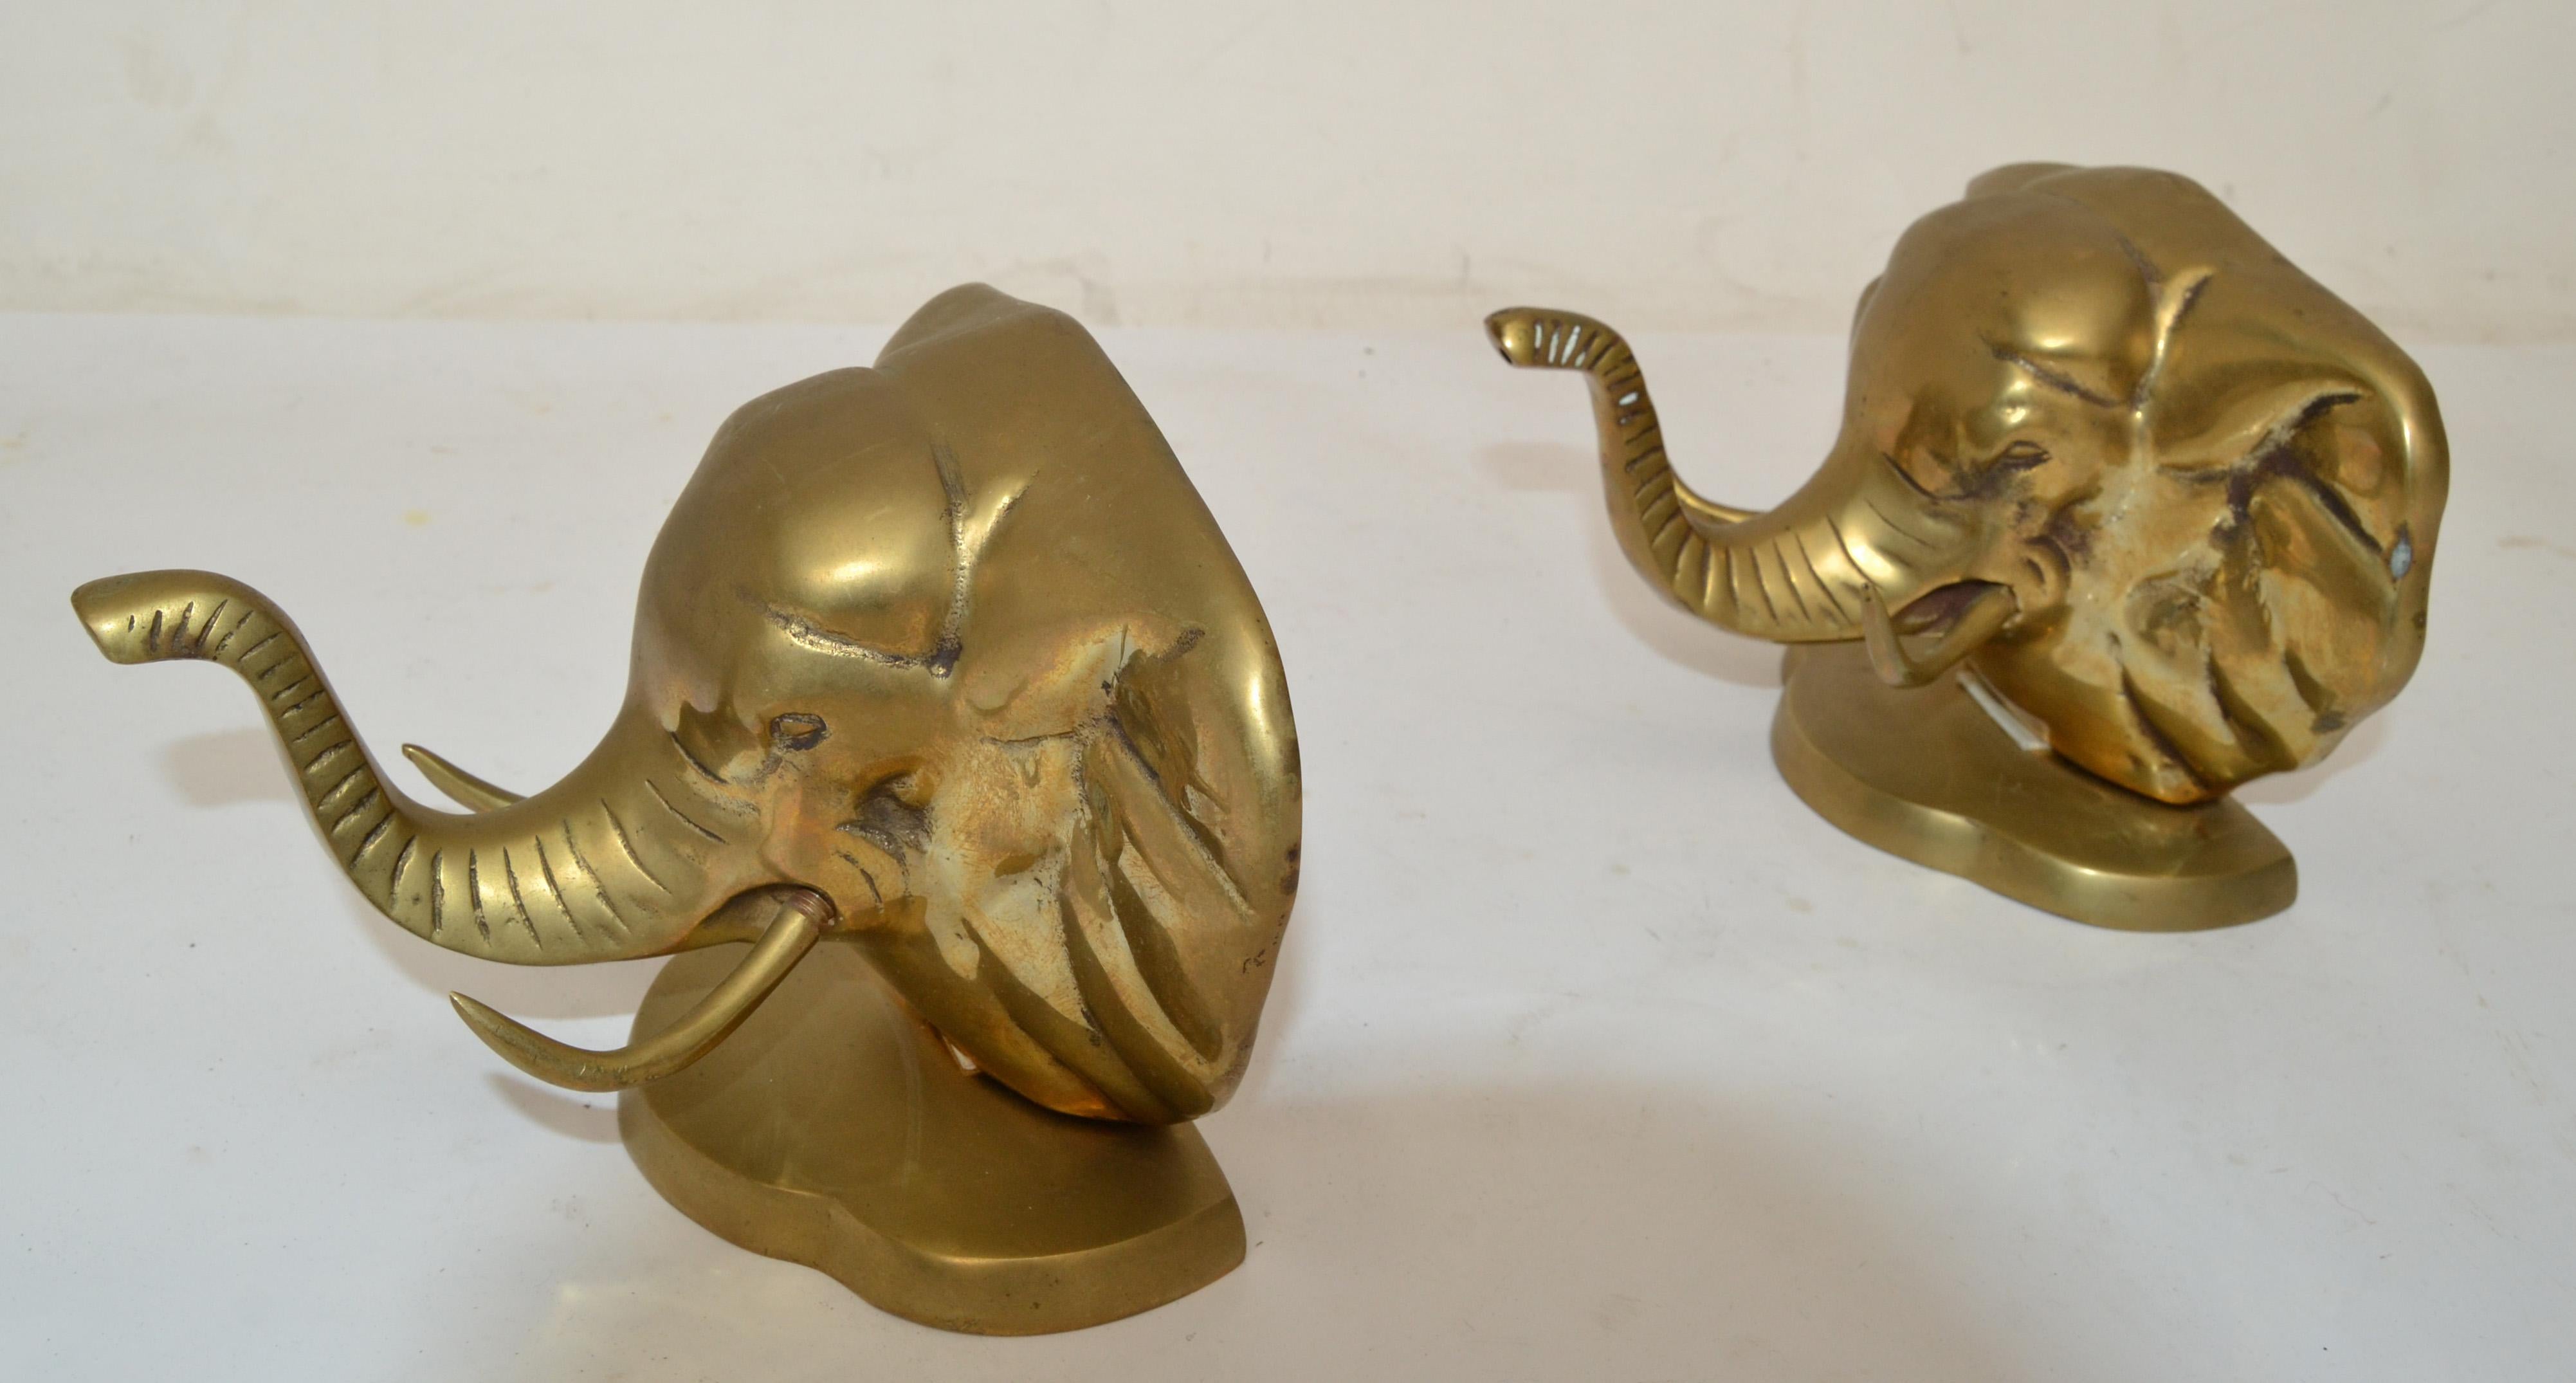 Hand-Crafted Vintage Handcrafted Brass Elephant Head Bookends, Pair For Sale